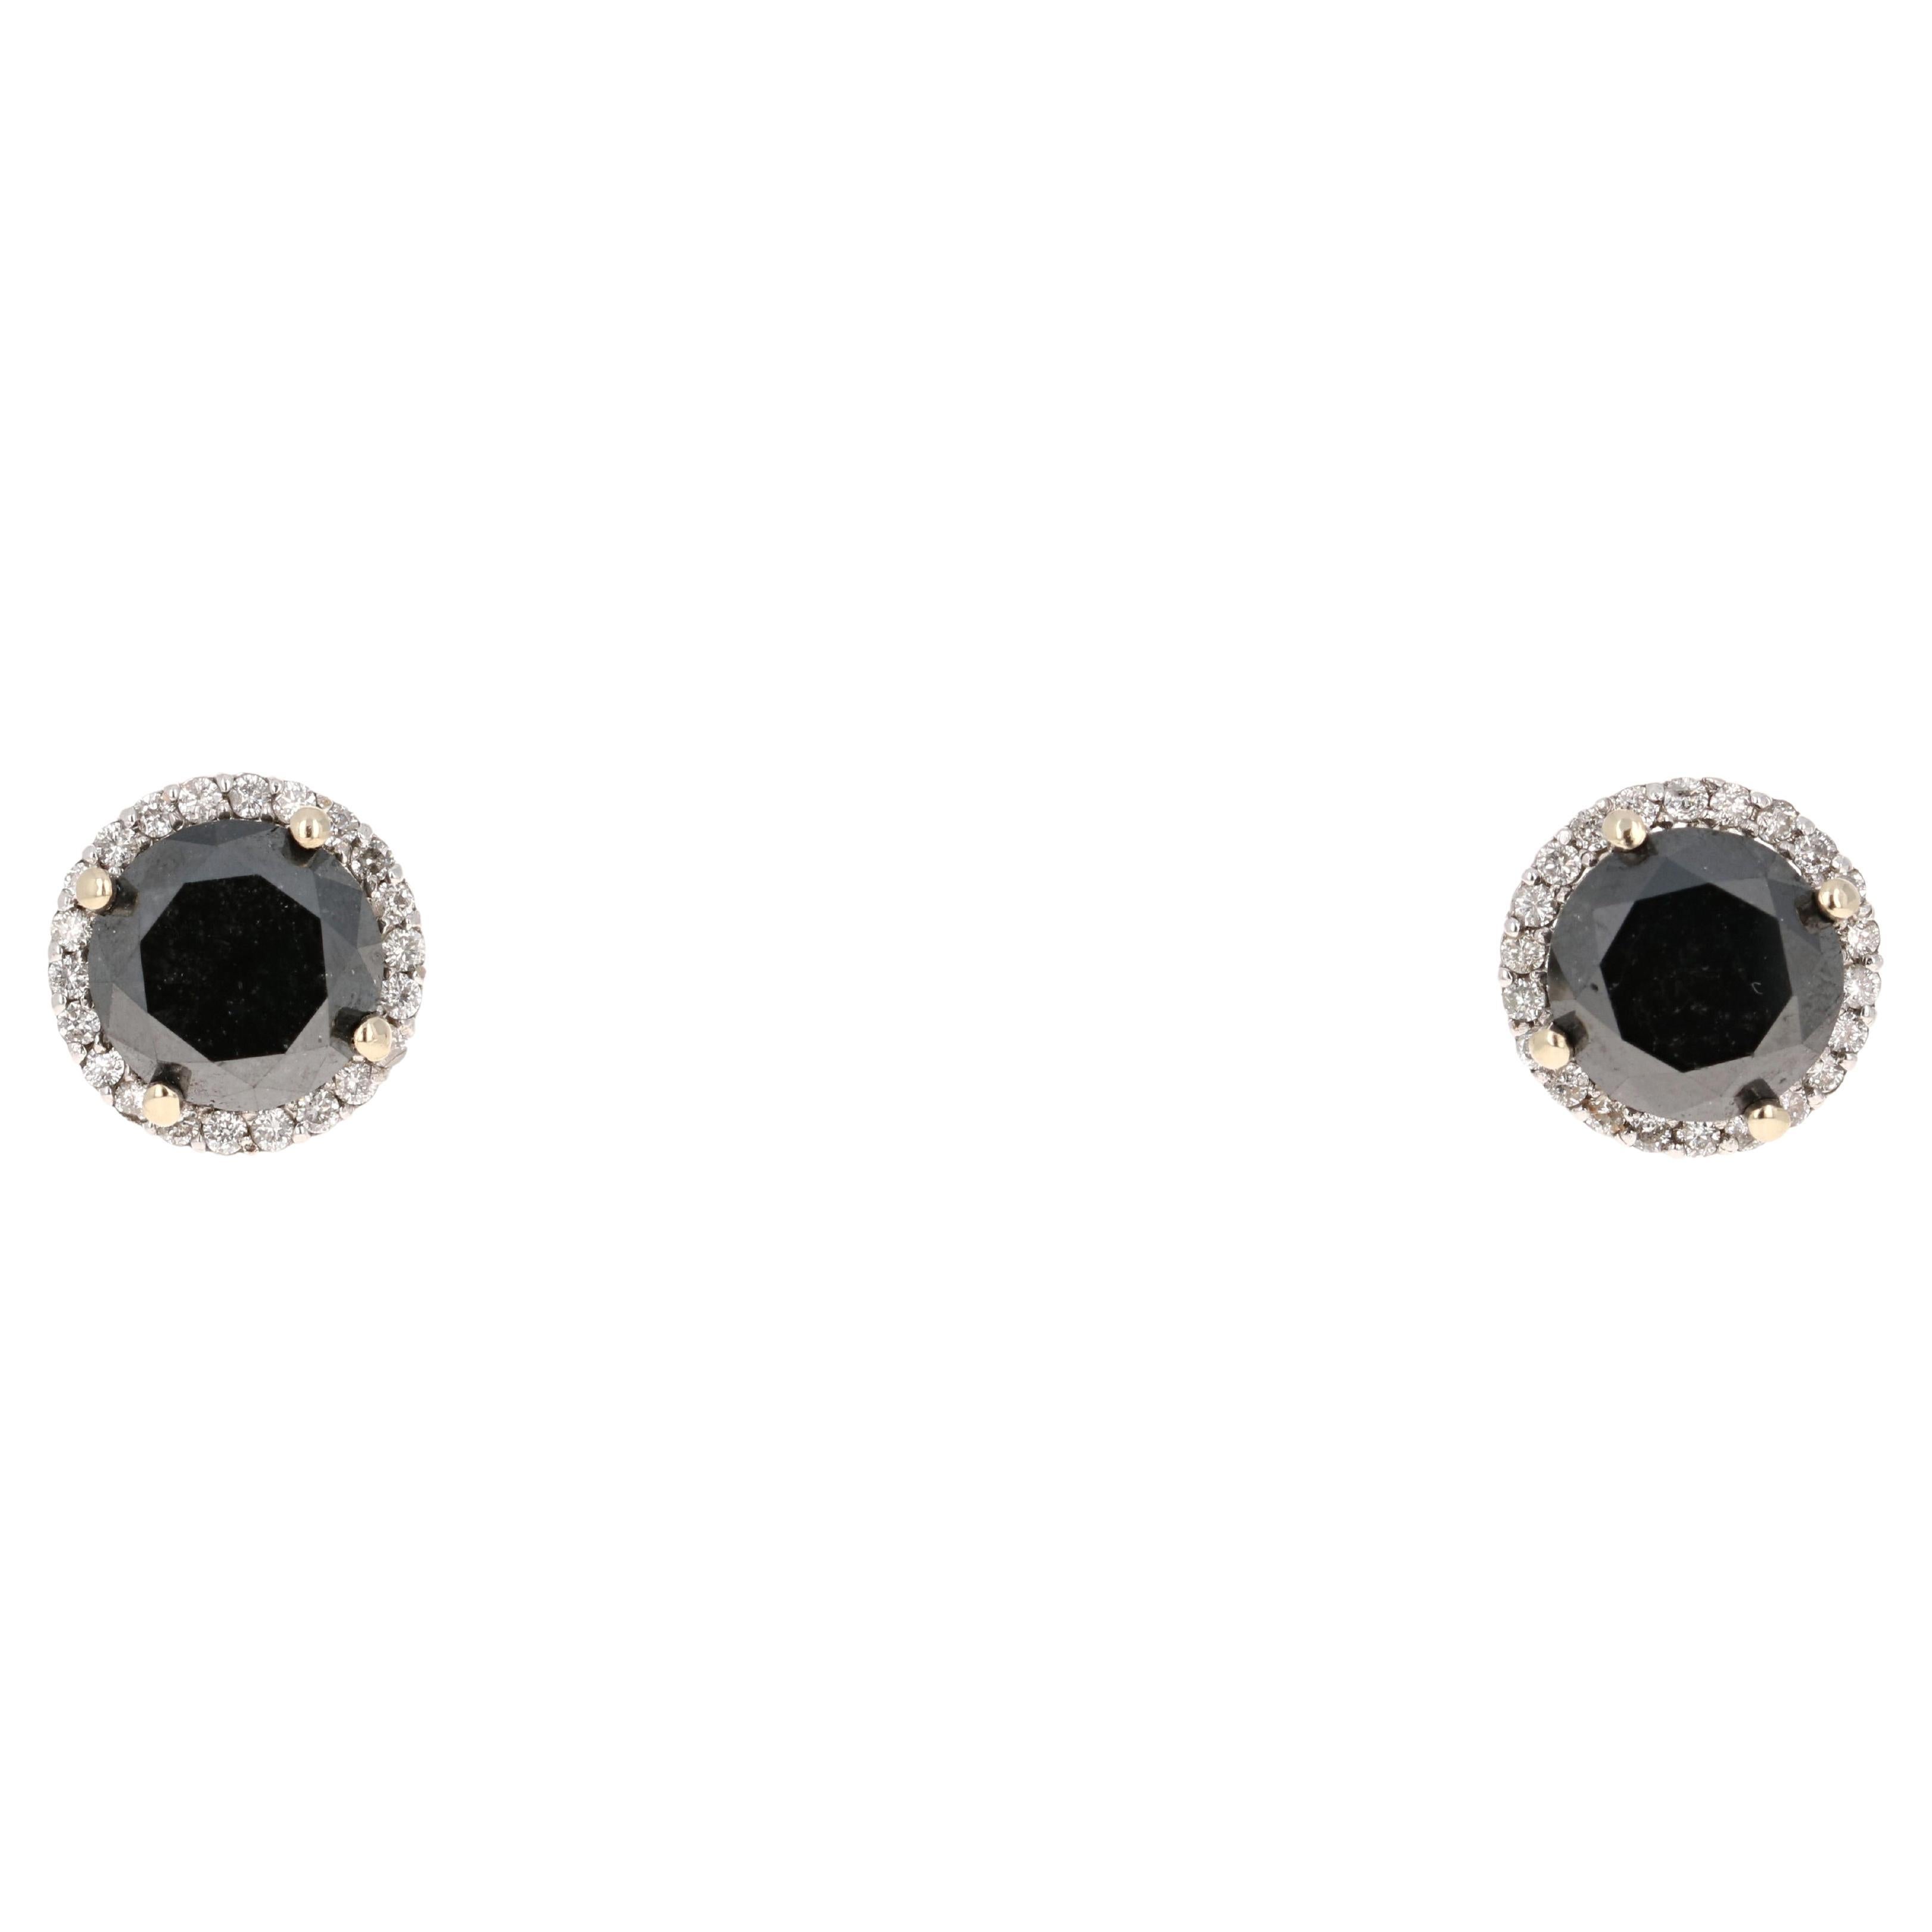 These fun & unique stud earrings have 2 Black Round Cut Diamonds that weigh 5.84 Carats and 44 Round Cut Diamonds that weigh 0.39 Carats. (Clarity: SI, Color: F) The total carat weight of the earrings are 6.23 Carats. The black diamonds measure at